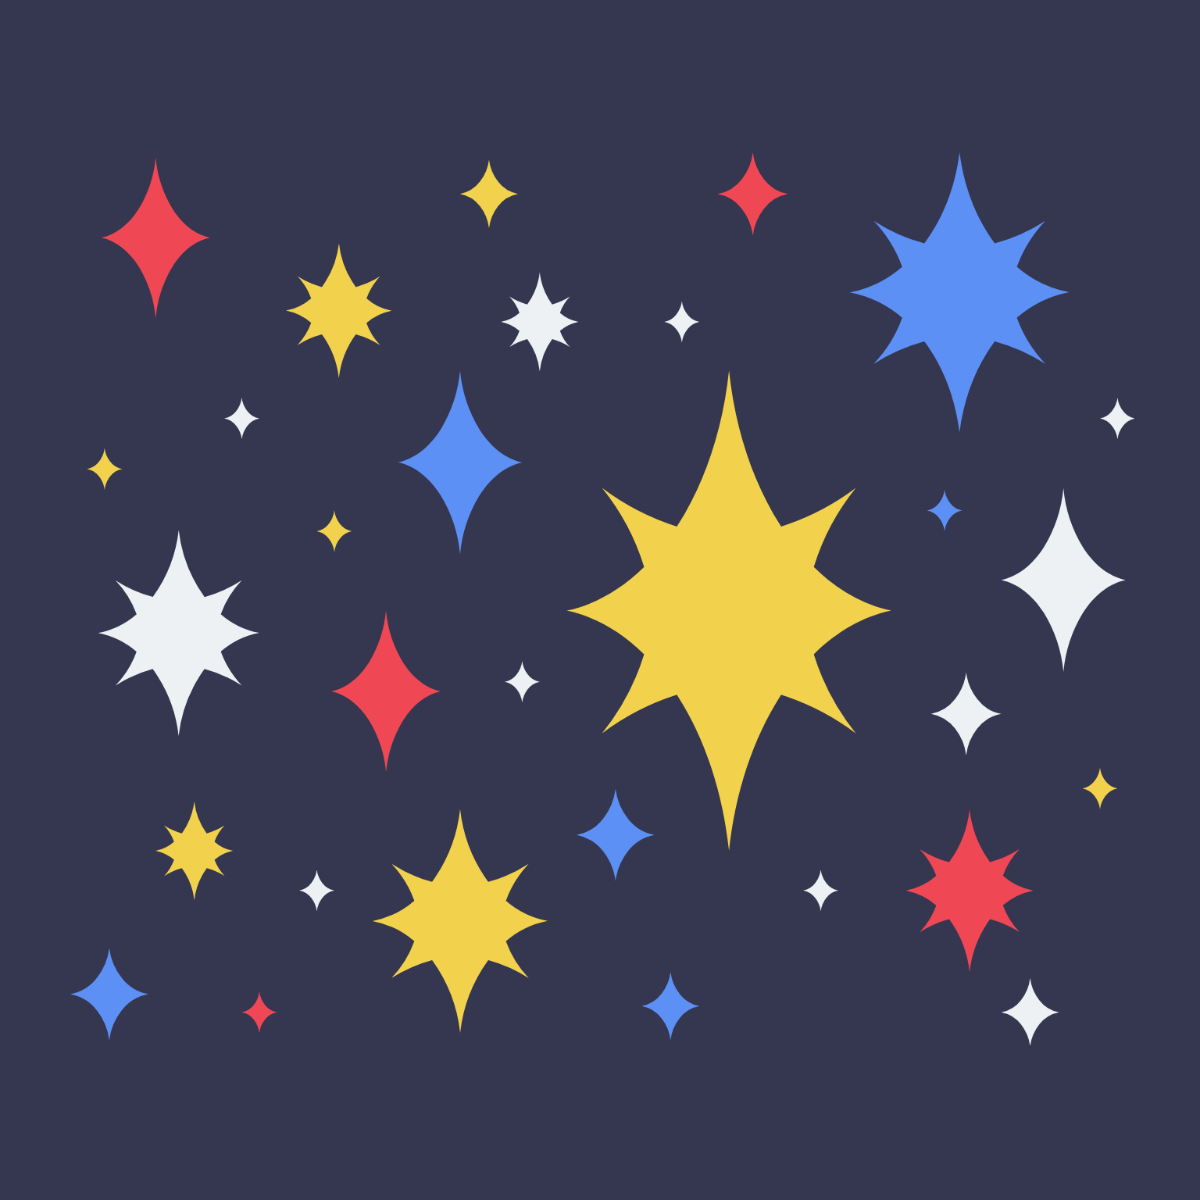 Star Cluster Vector Template